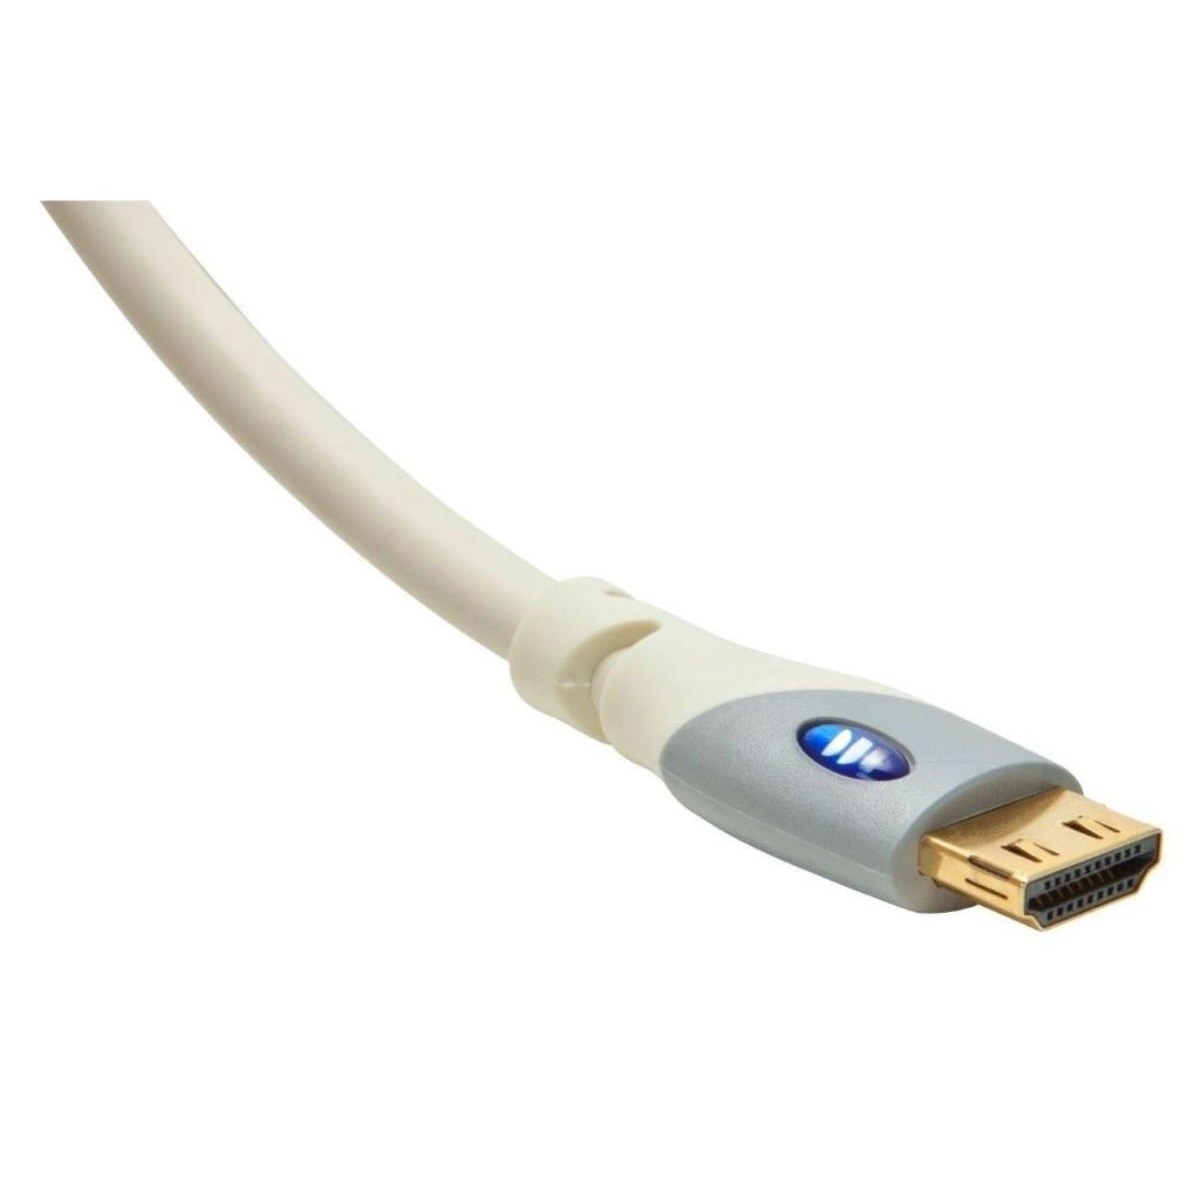 HDMI-Kabel 2,4m High Weiß HDMI-Kabel, ADV CABLE Speed MONSTER